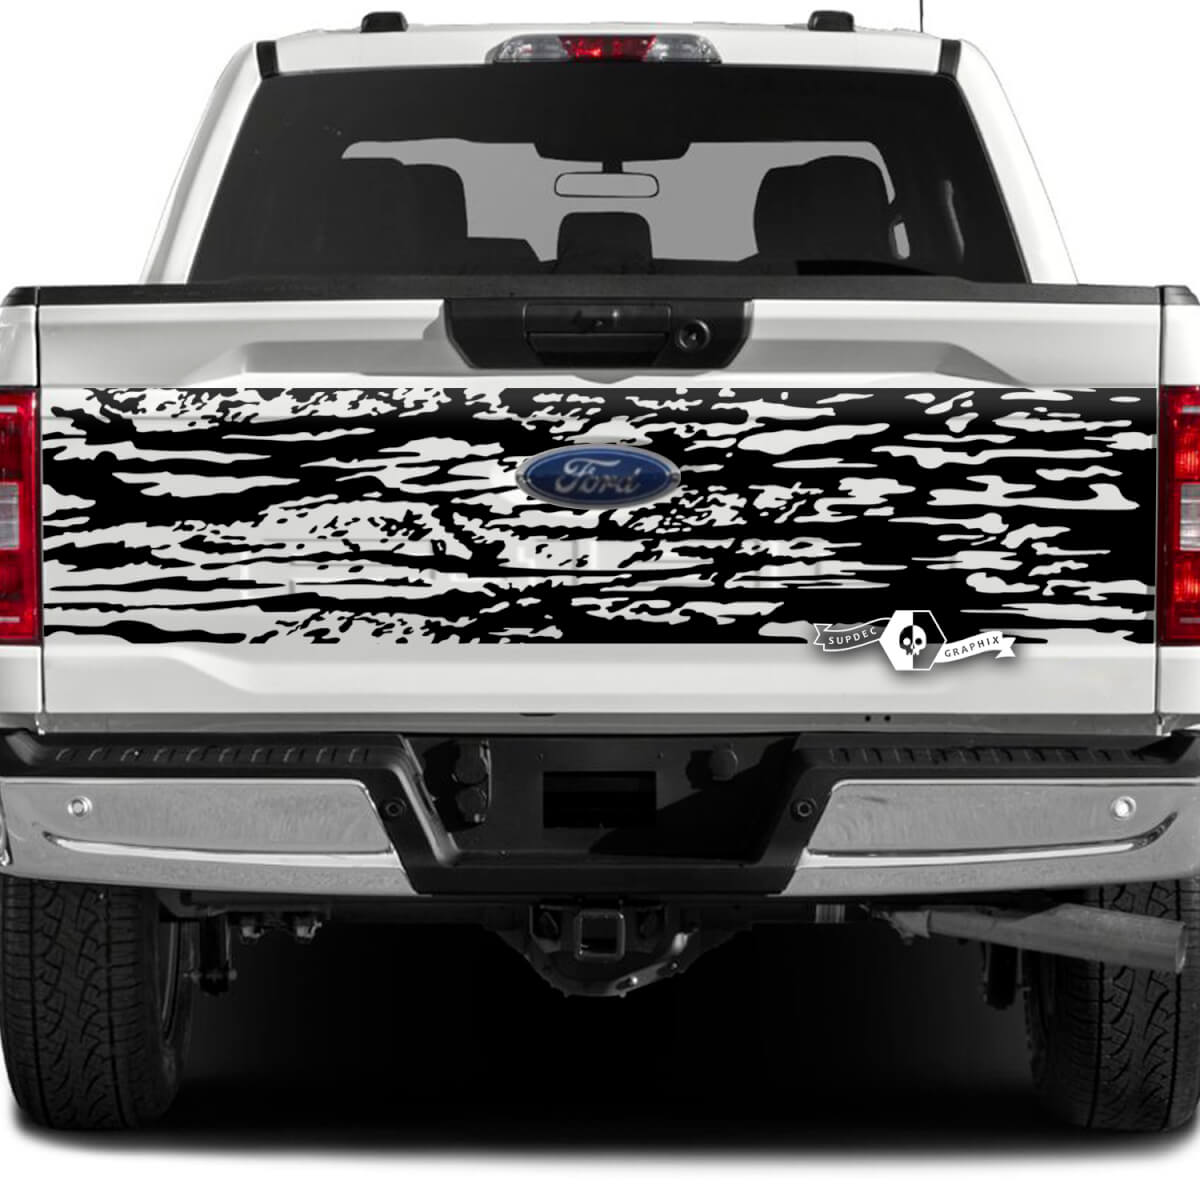 Ford F-150 XLT Tailgate Splash Mud Graphics Side Decals Stickers
